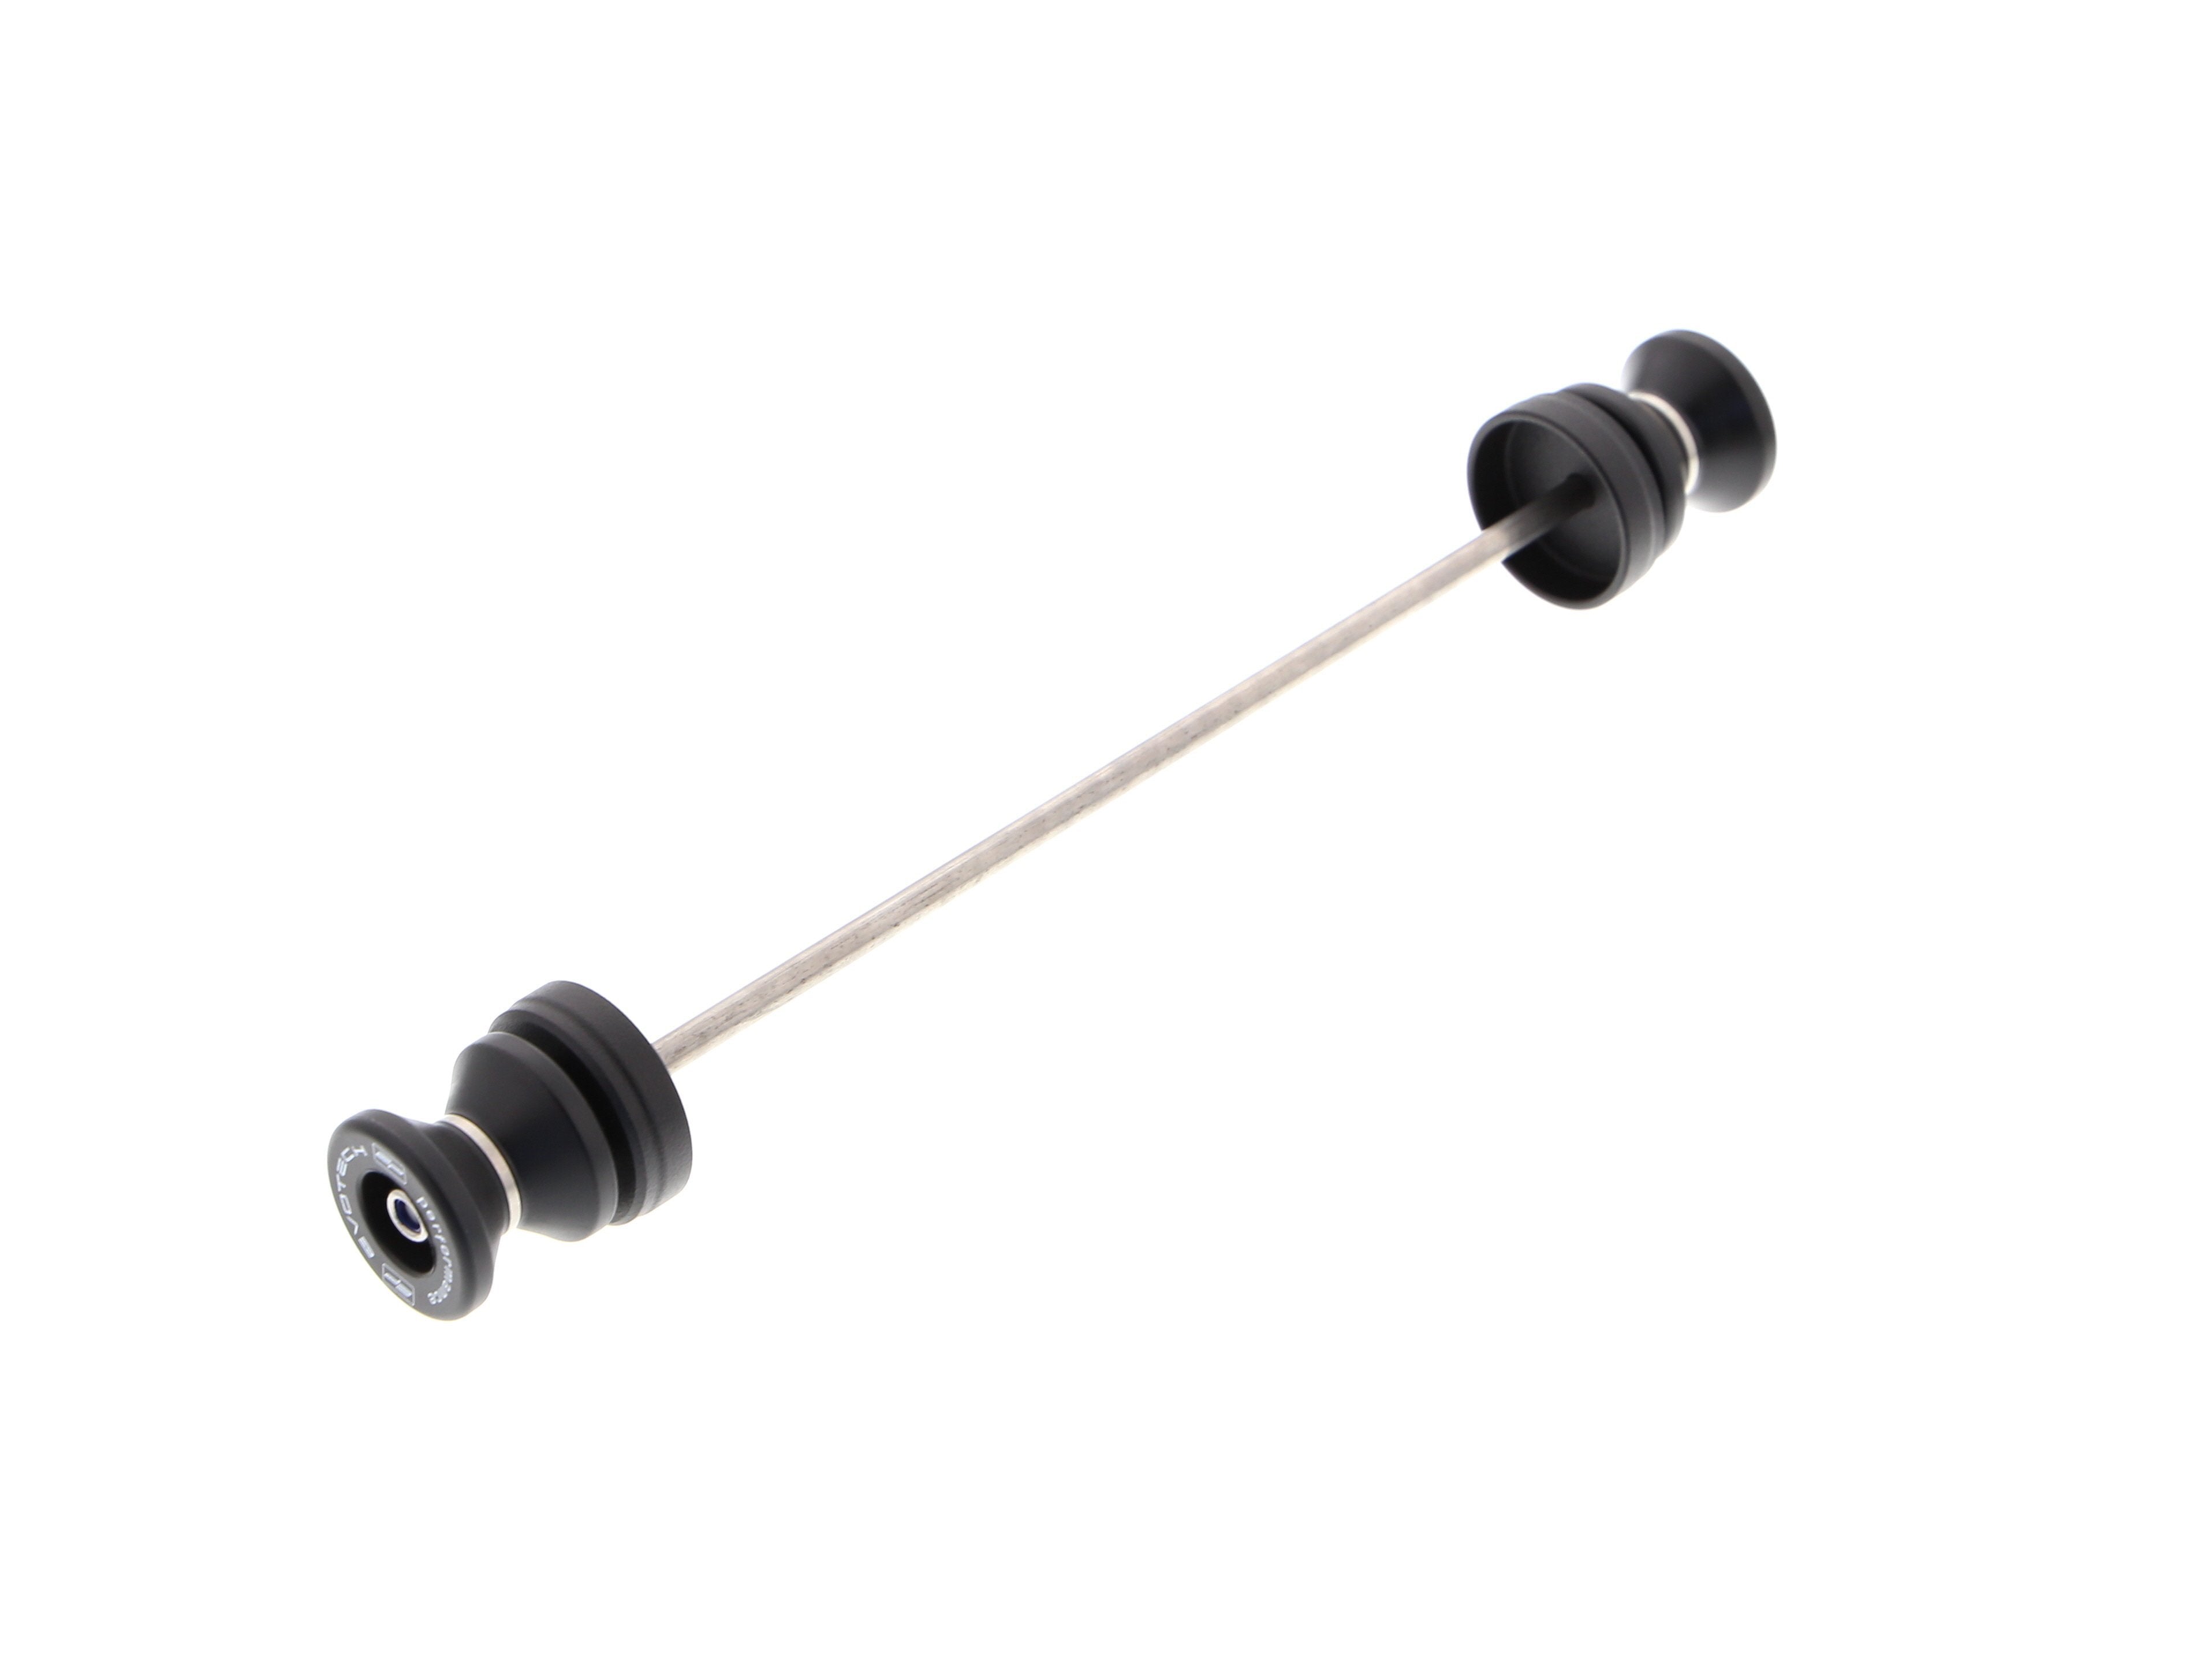 EP Paddock Stand Bobbins for the Ducati Scrambler Full Throttle comprises a spindle rod with EPâs signature nylon paddock stand bobbins either end with precision shaped aluminium spacer.